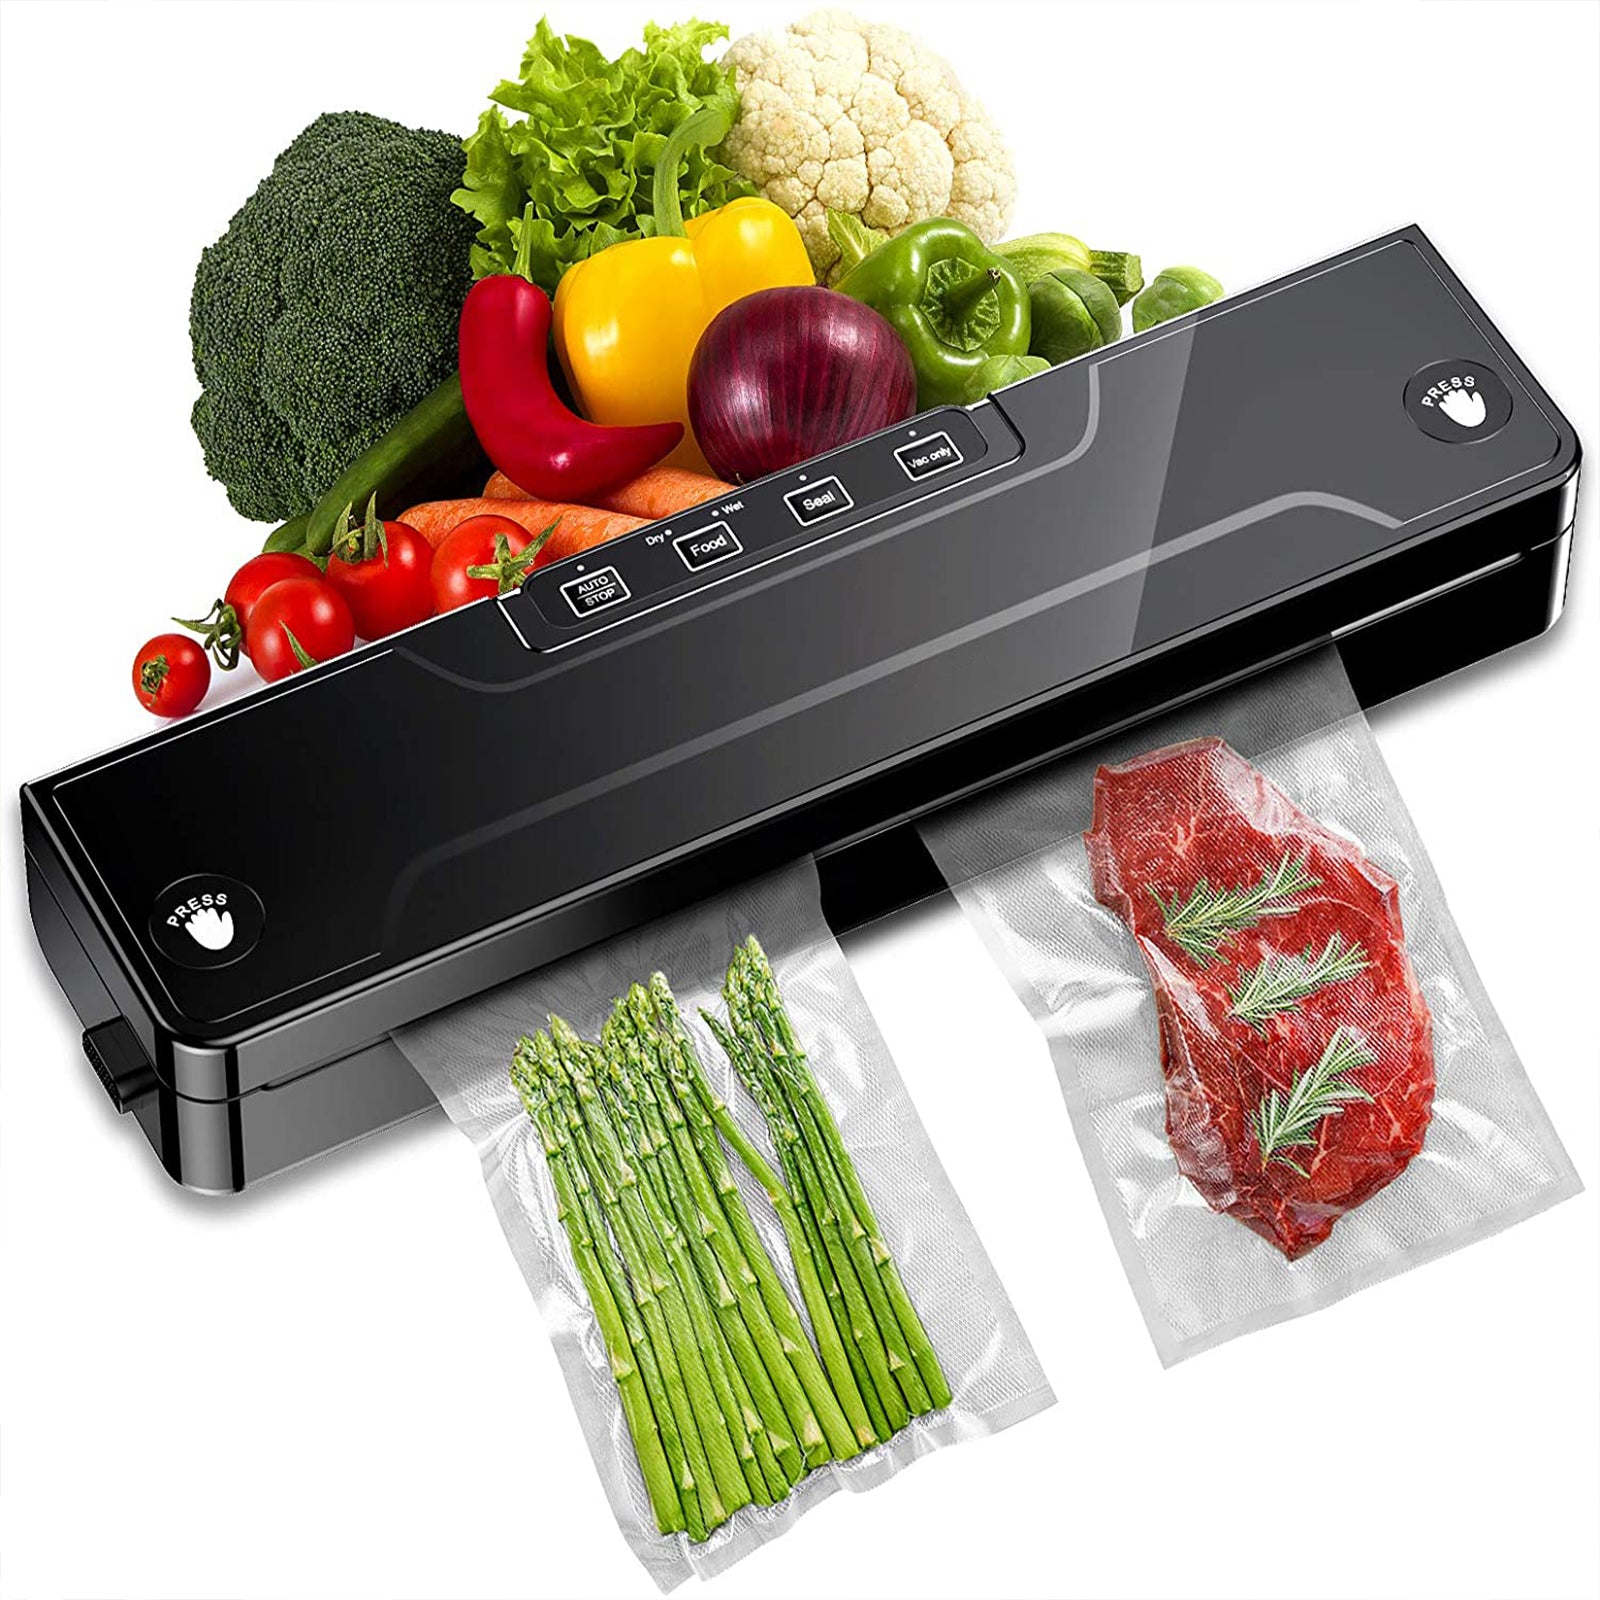 SKONYON Vacuum Sealer Machine with Suction Hose and 15 Vacuum Bags Included